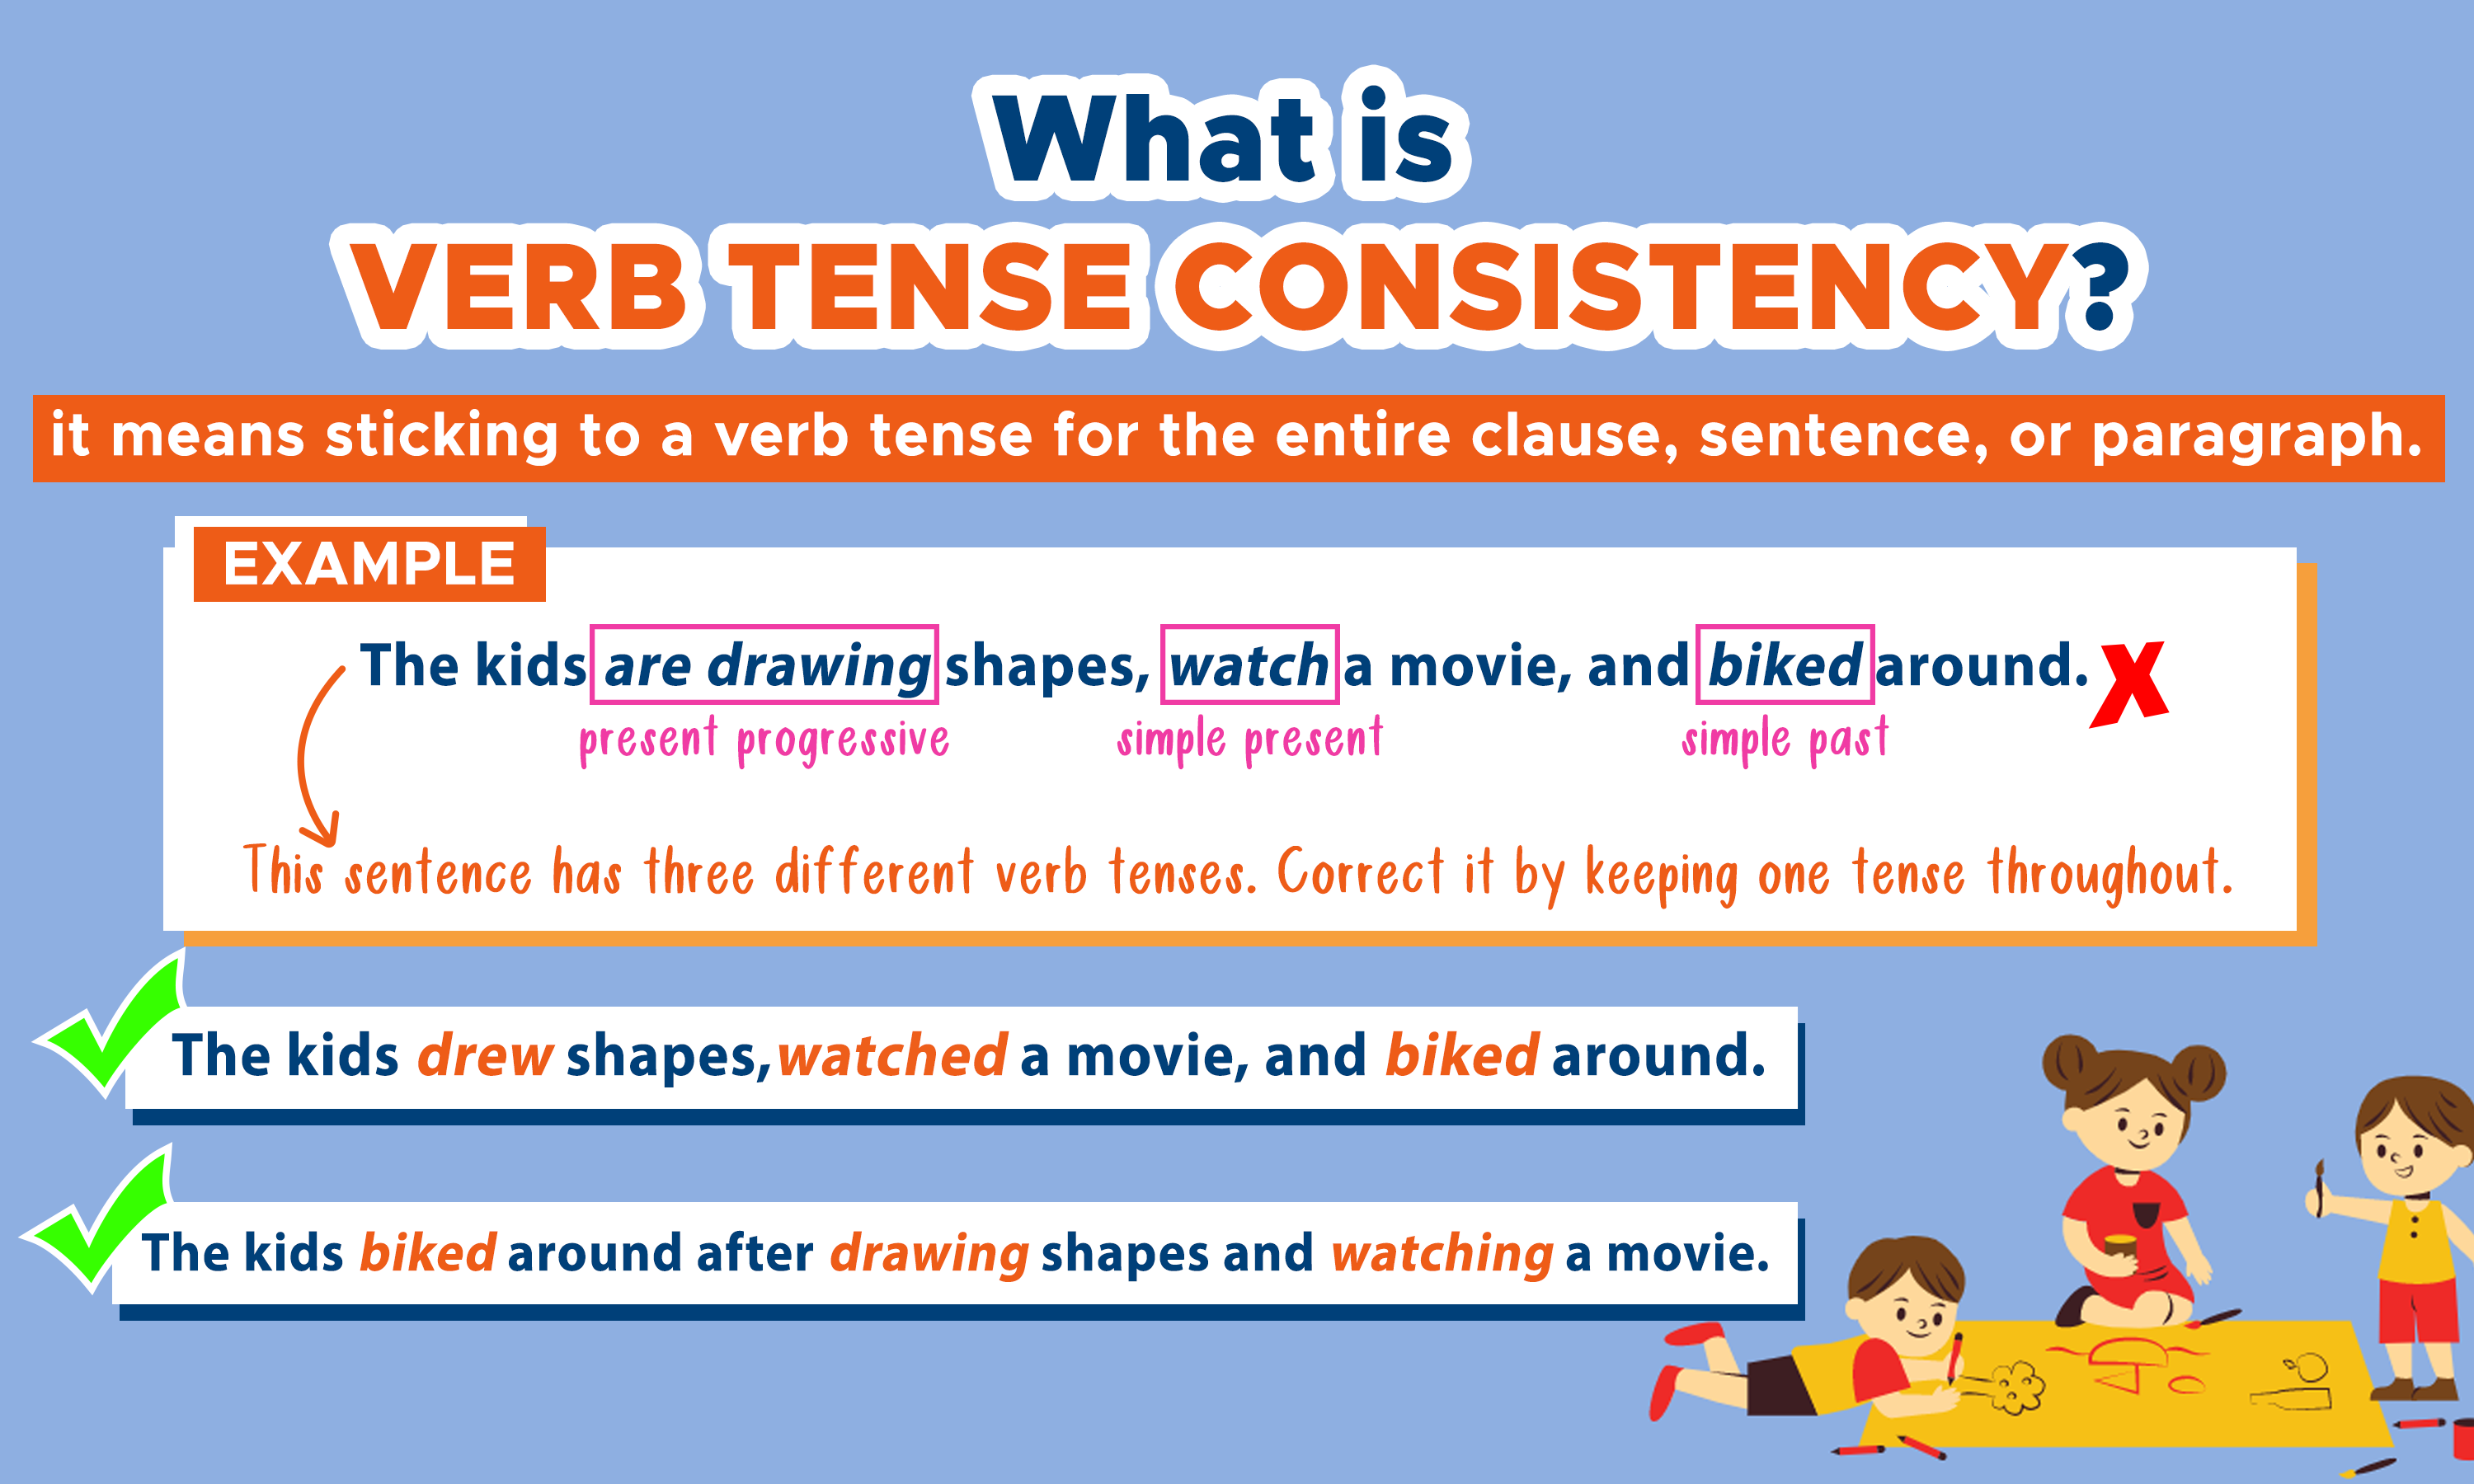 12 Tenses and Example Sentences in English Grammar Tense Example